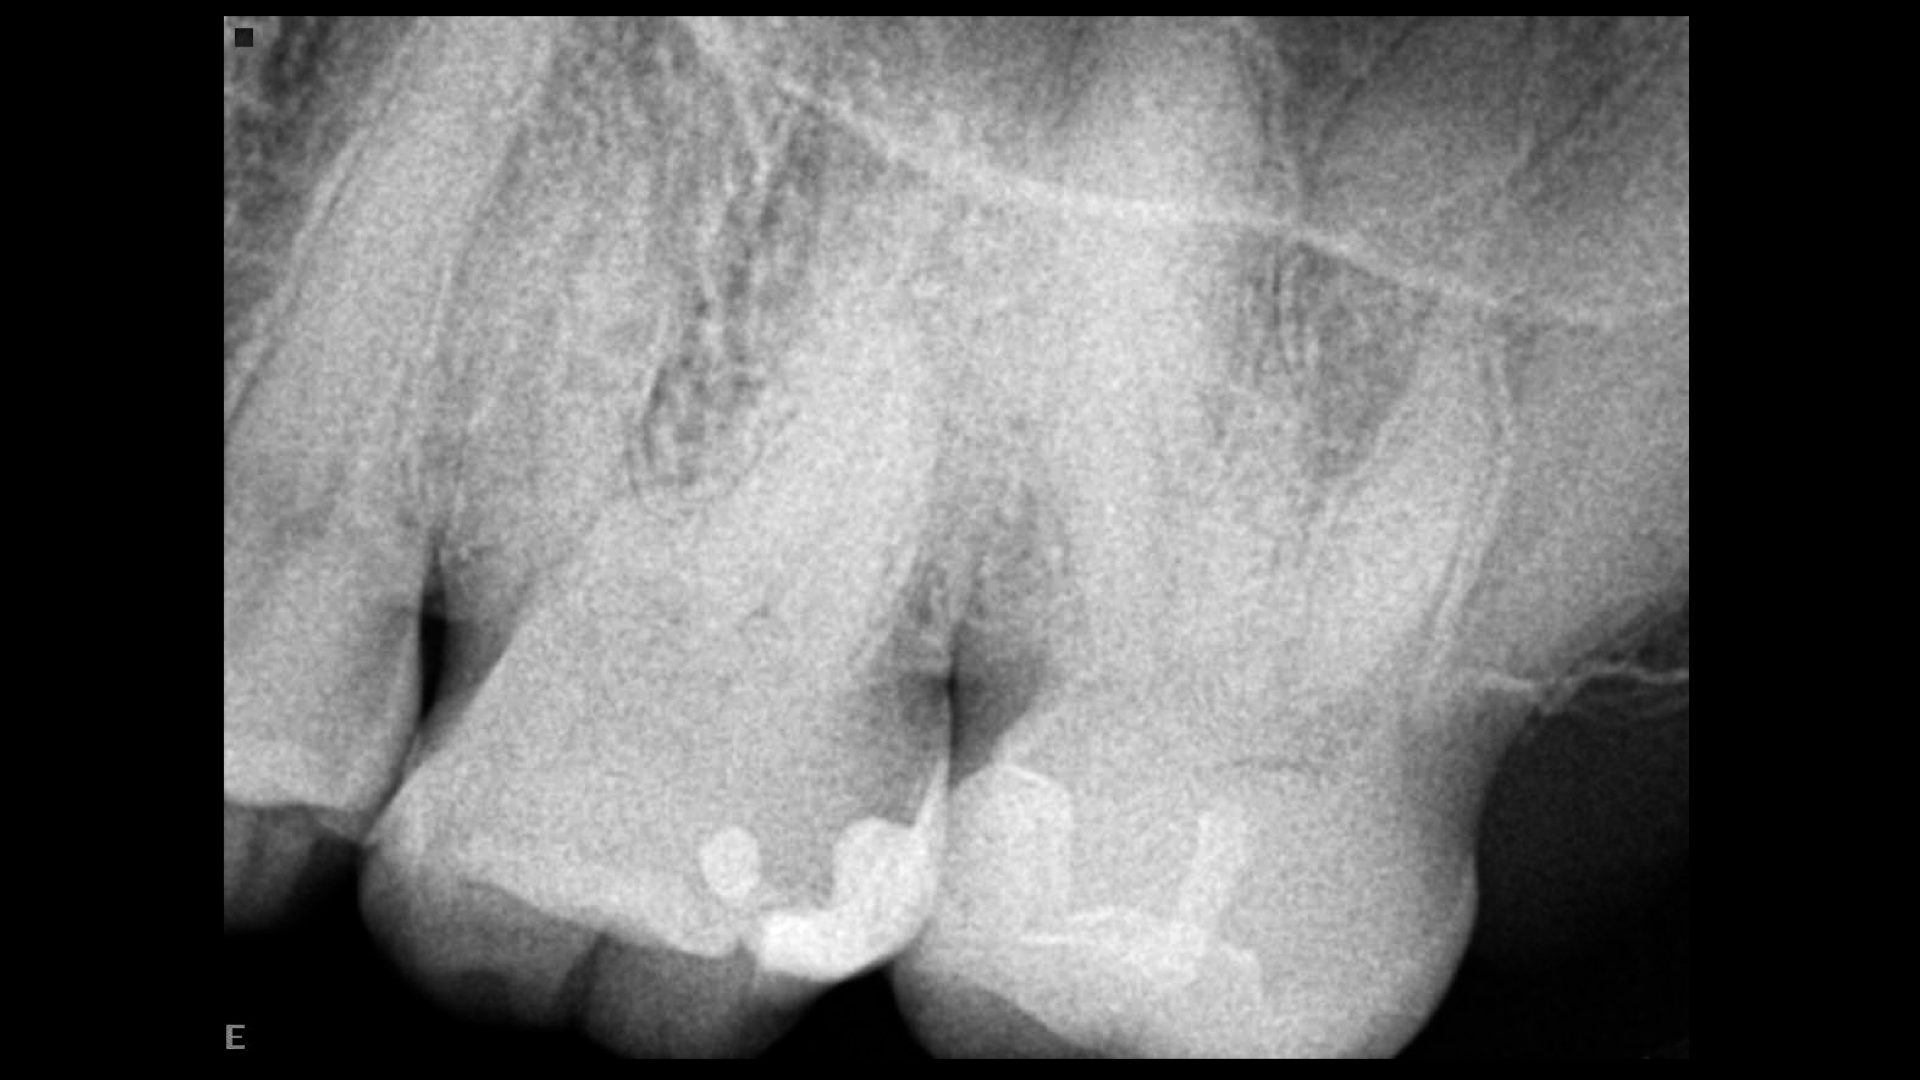 Fig. 1: Pre-op radiograph, showing a very complex root canal system and a calcified pulp chamber.